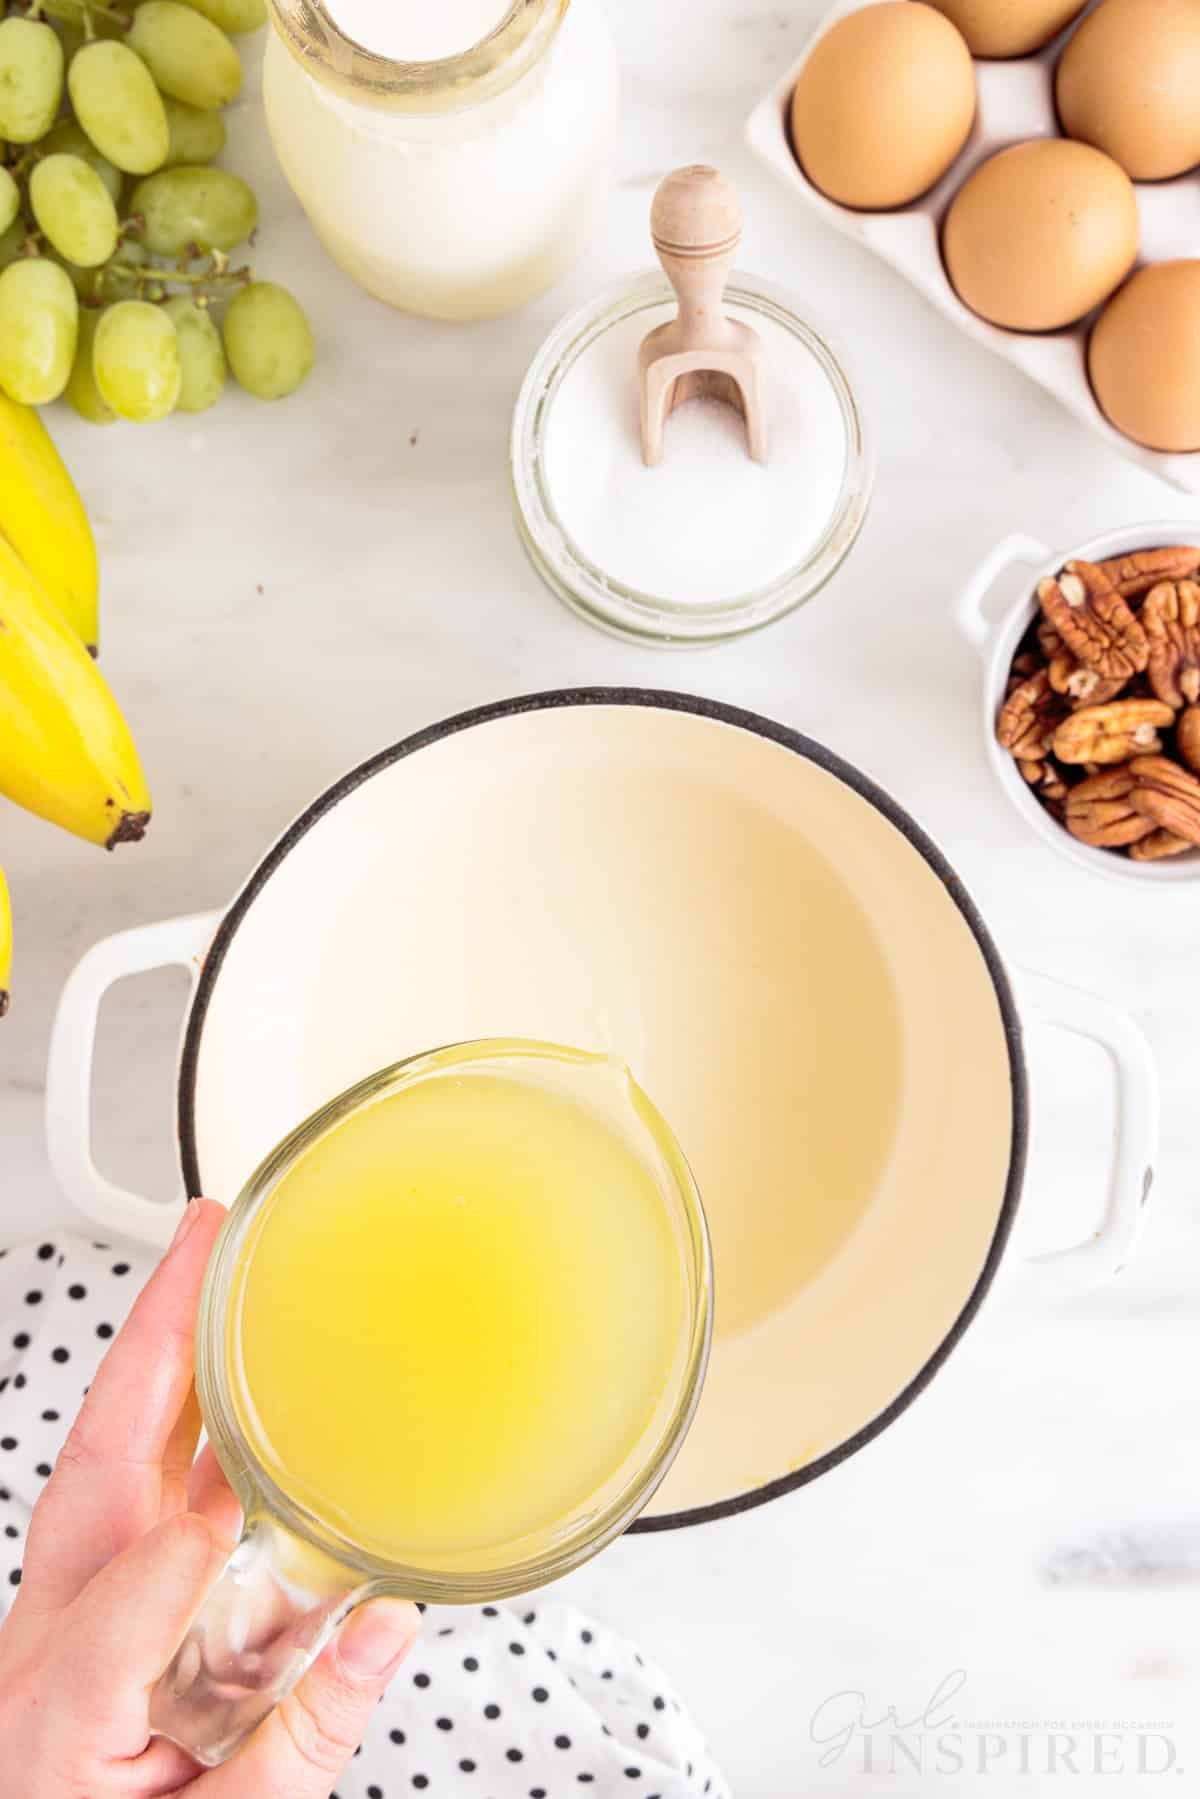 Hand pouring pineapple and orange juices into a saucepan, bunch of bananas, polka dot linen, green grapes, bowl of granulated sugar, tray of eggs, bowl of pecans, jar of heavy cream, on a marble countertop.